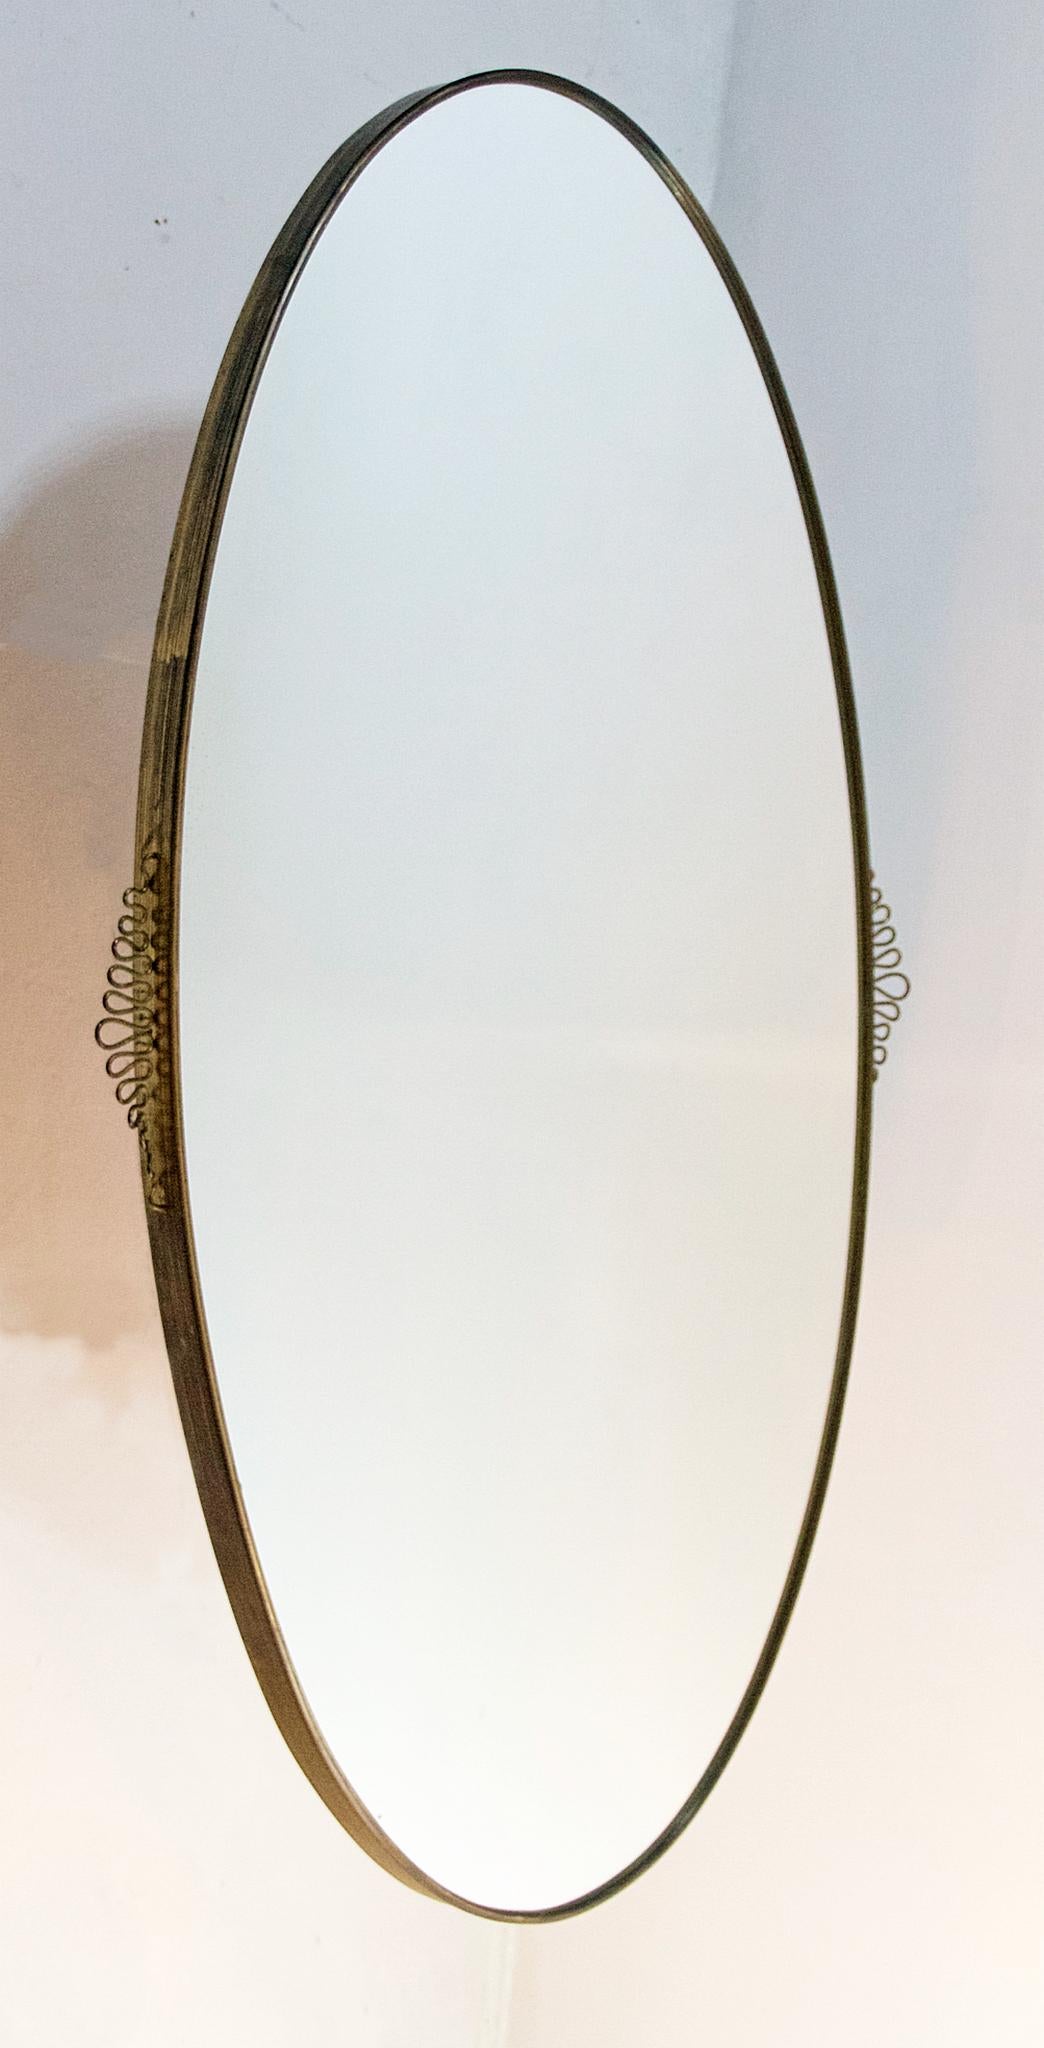 An oval mirror in the manner of Gio Ponti from the 1950s in brass and with brass ornaments significant for the era on the side.